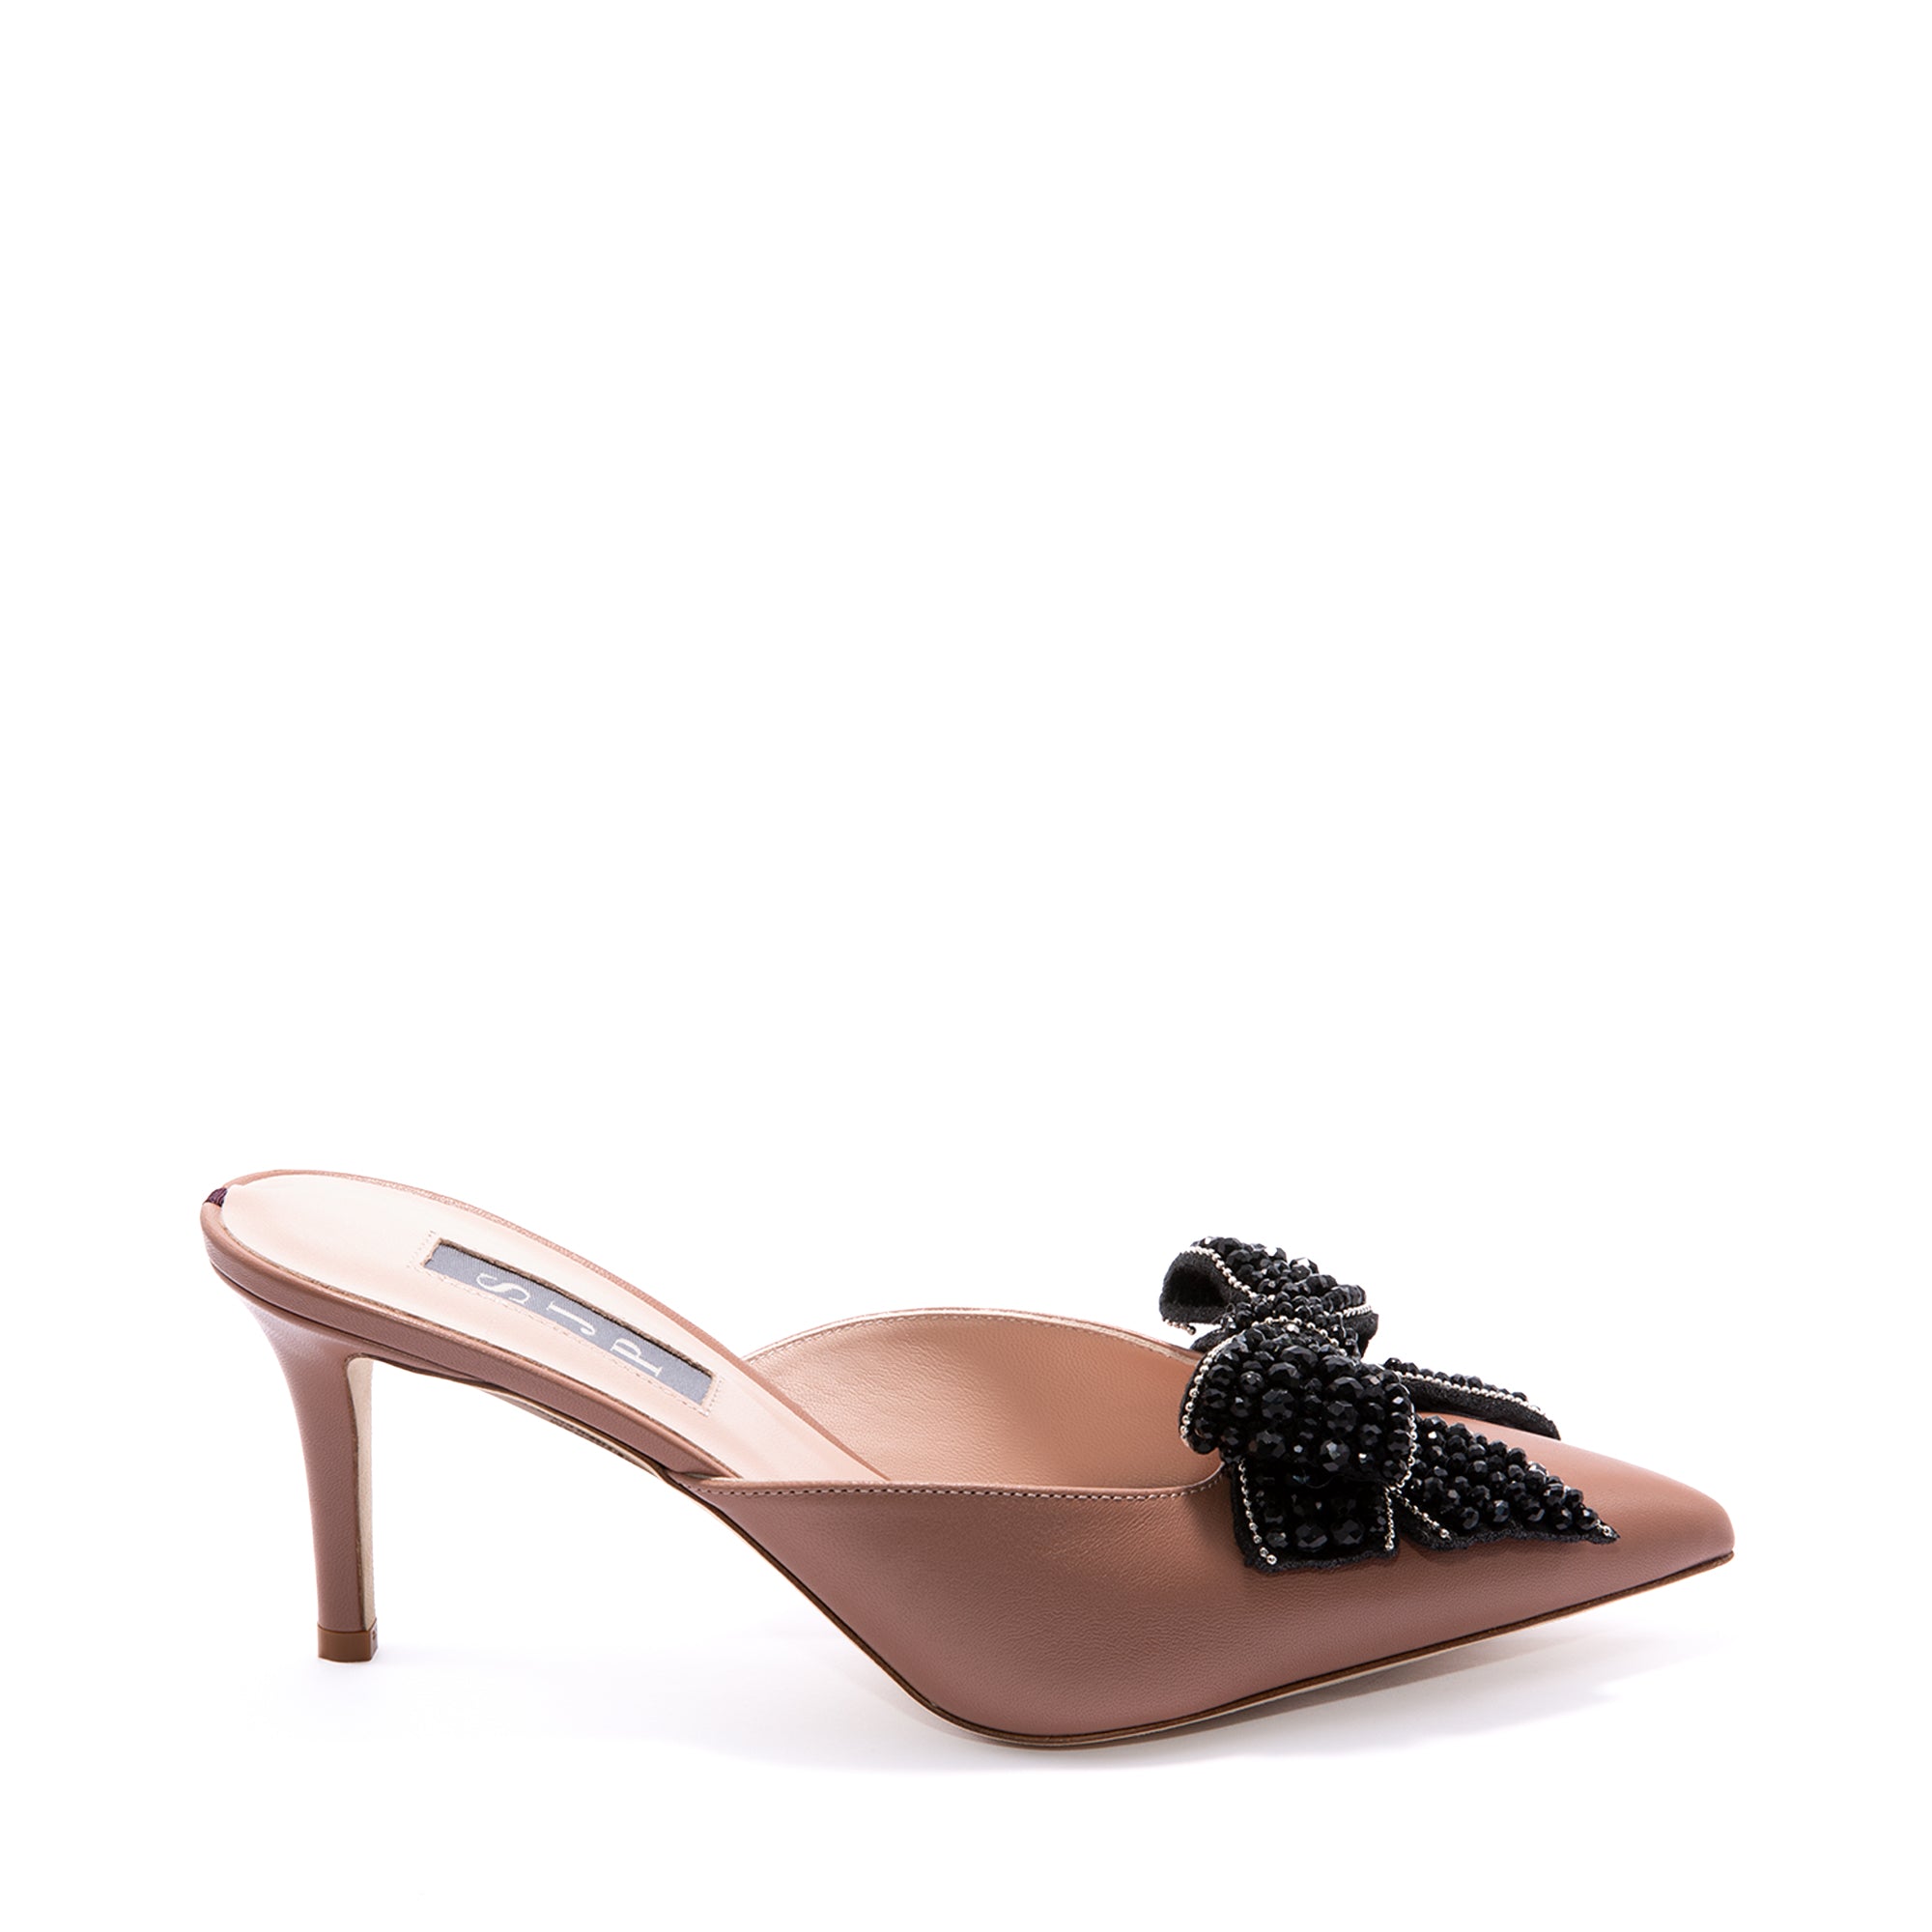 SJP by Sarah Jessica Parker Marvel 70mm Nude Leather Mules